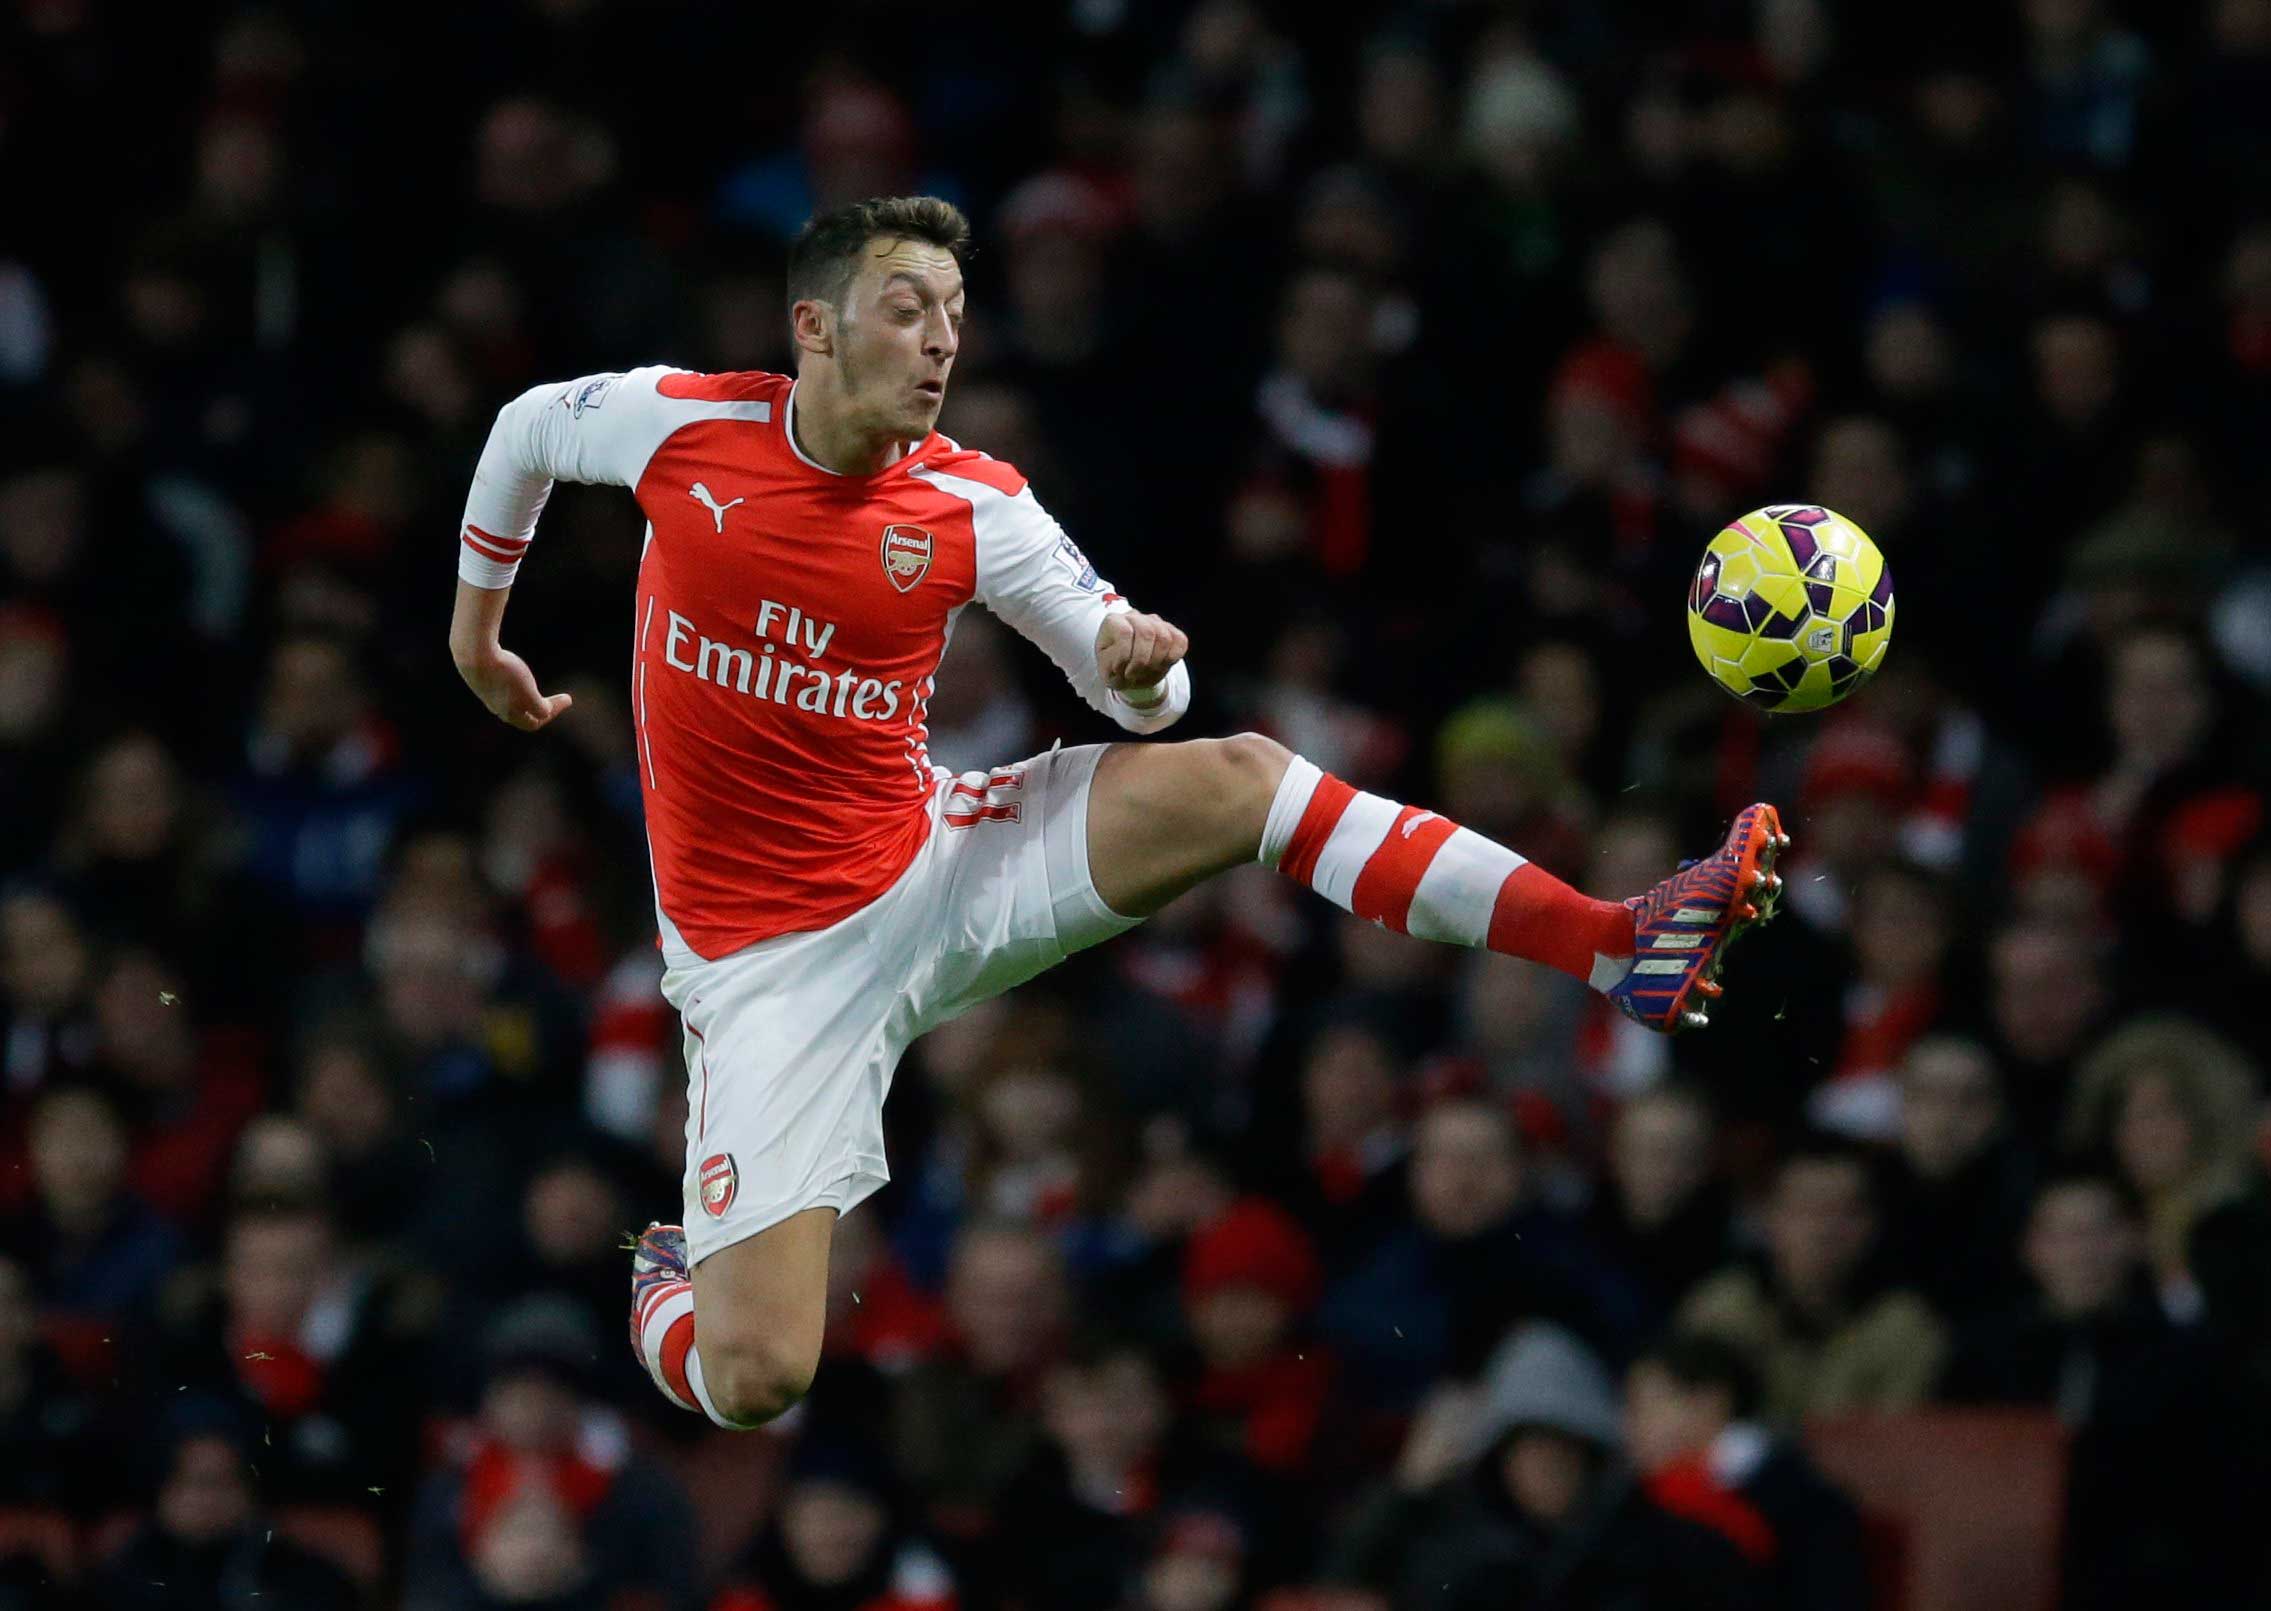 Arsenal's Mesut Ozil controls the ball during the English Premier League soccer match between Arsenal and Leicester City at the Emirates Stadium in London, Feb. 10, 2015.